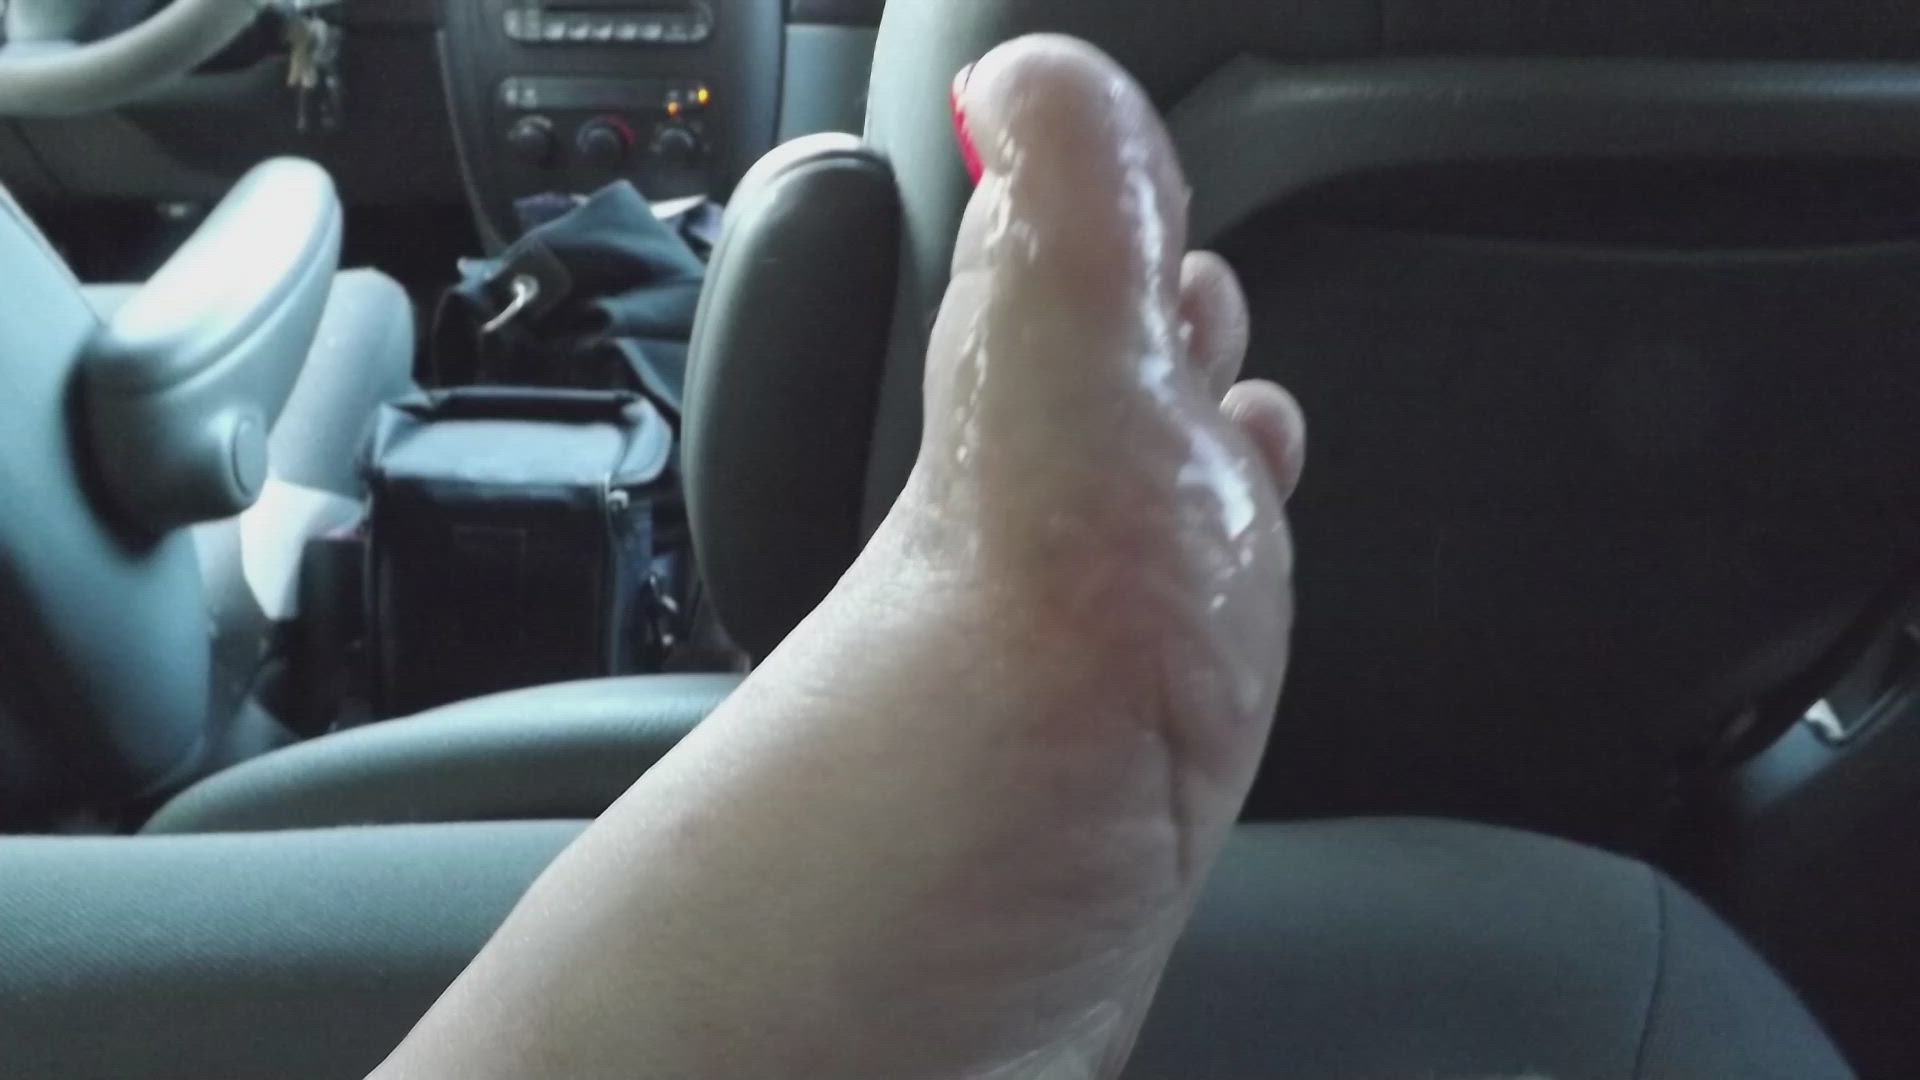 Footjob porn video with onlyfans model Sweet Feet <strong>@sweetfeetsplace</strong>